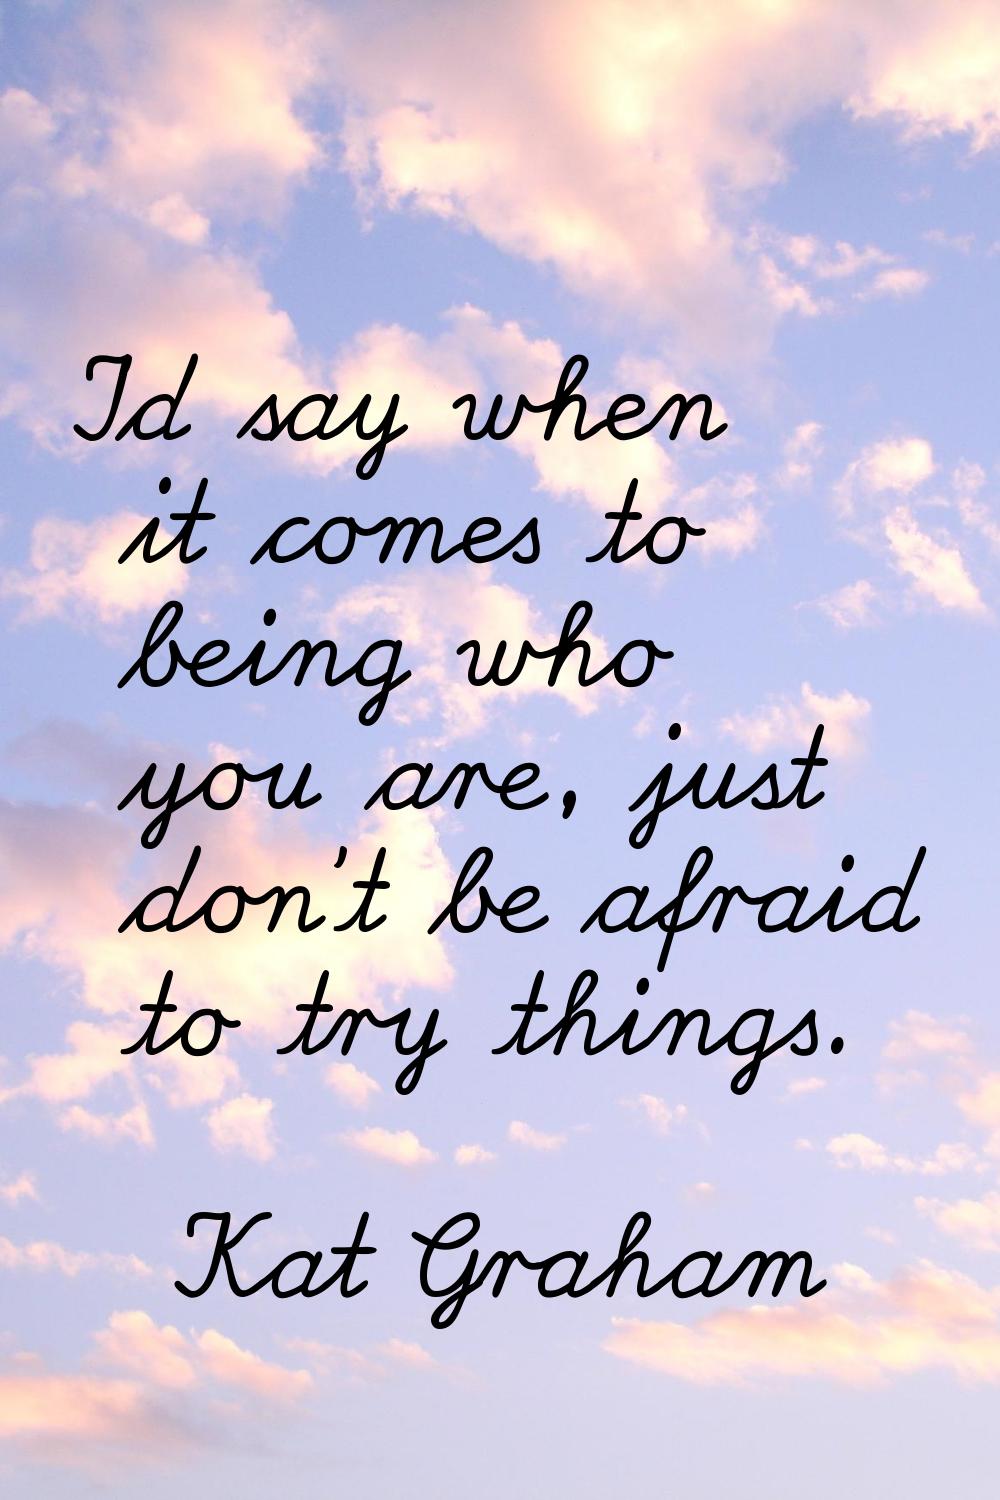 I'd say when it comes to being who you are, just don't be afraid to try things.